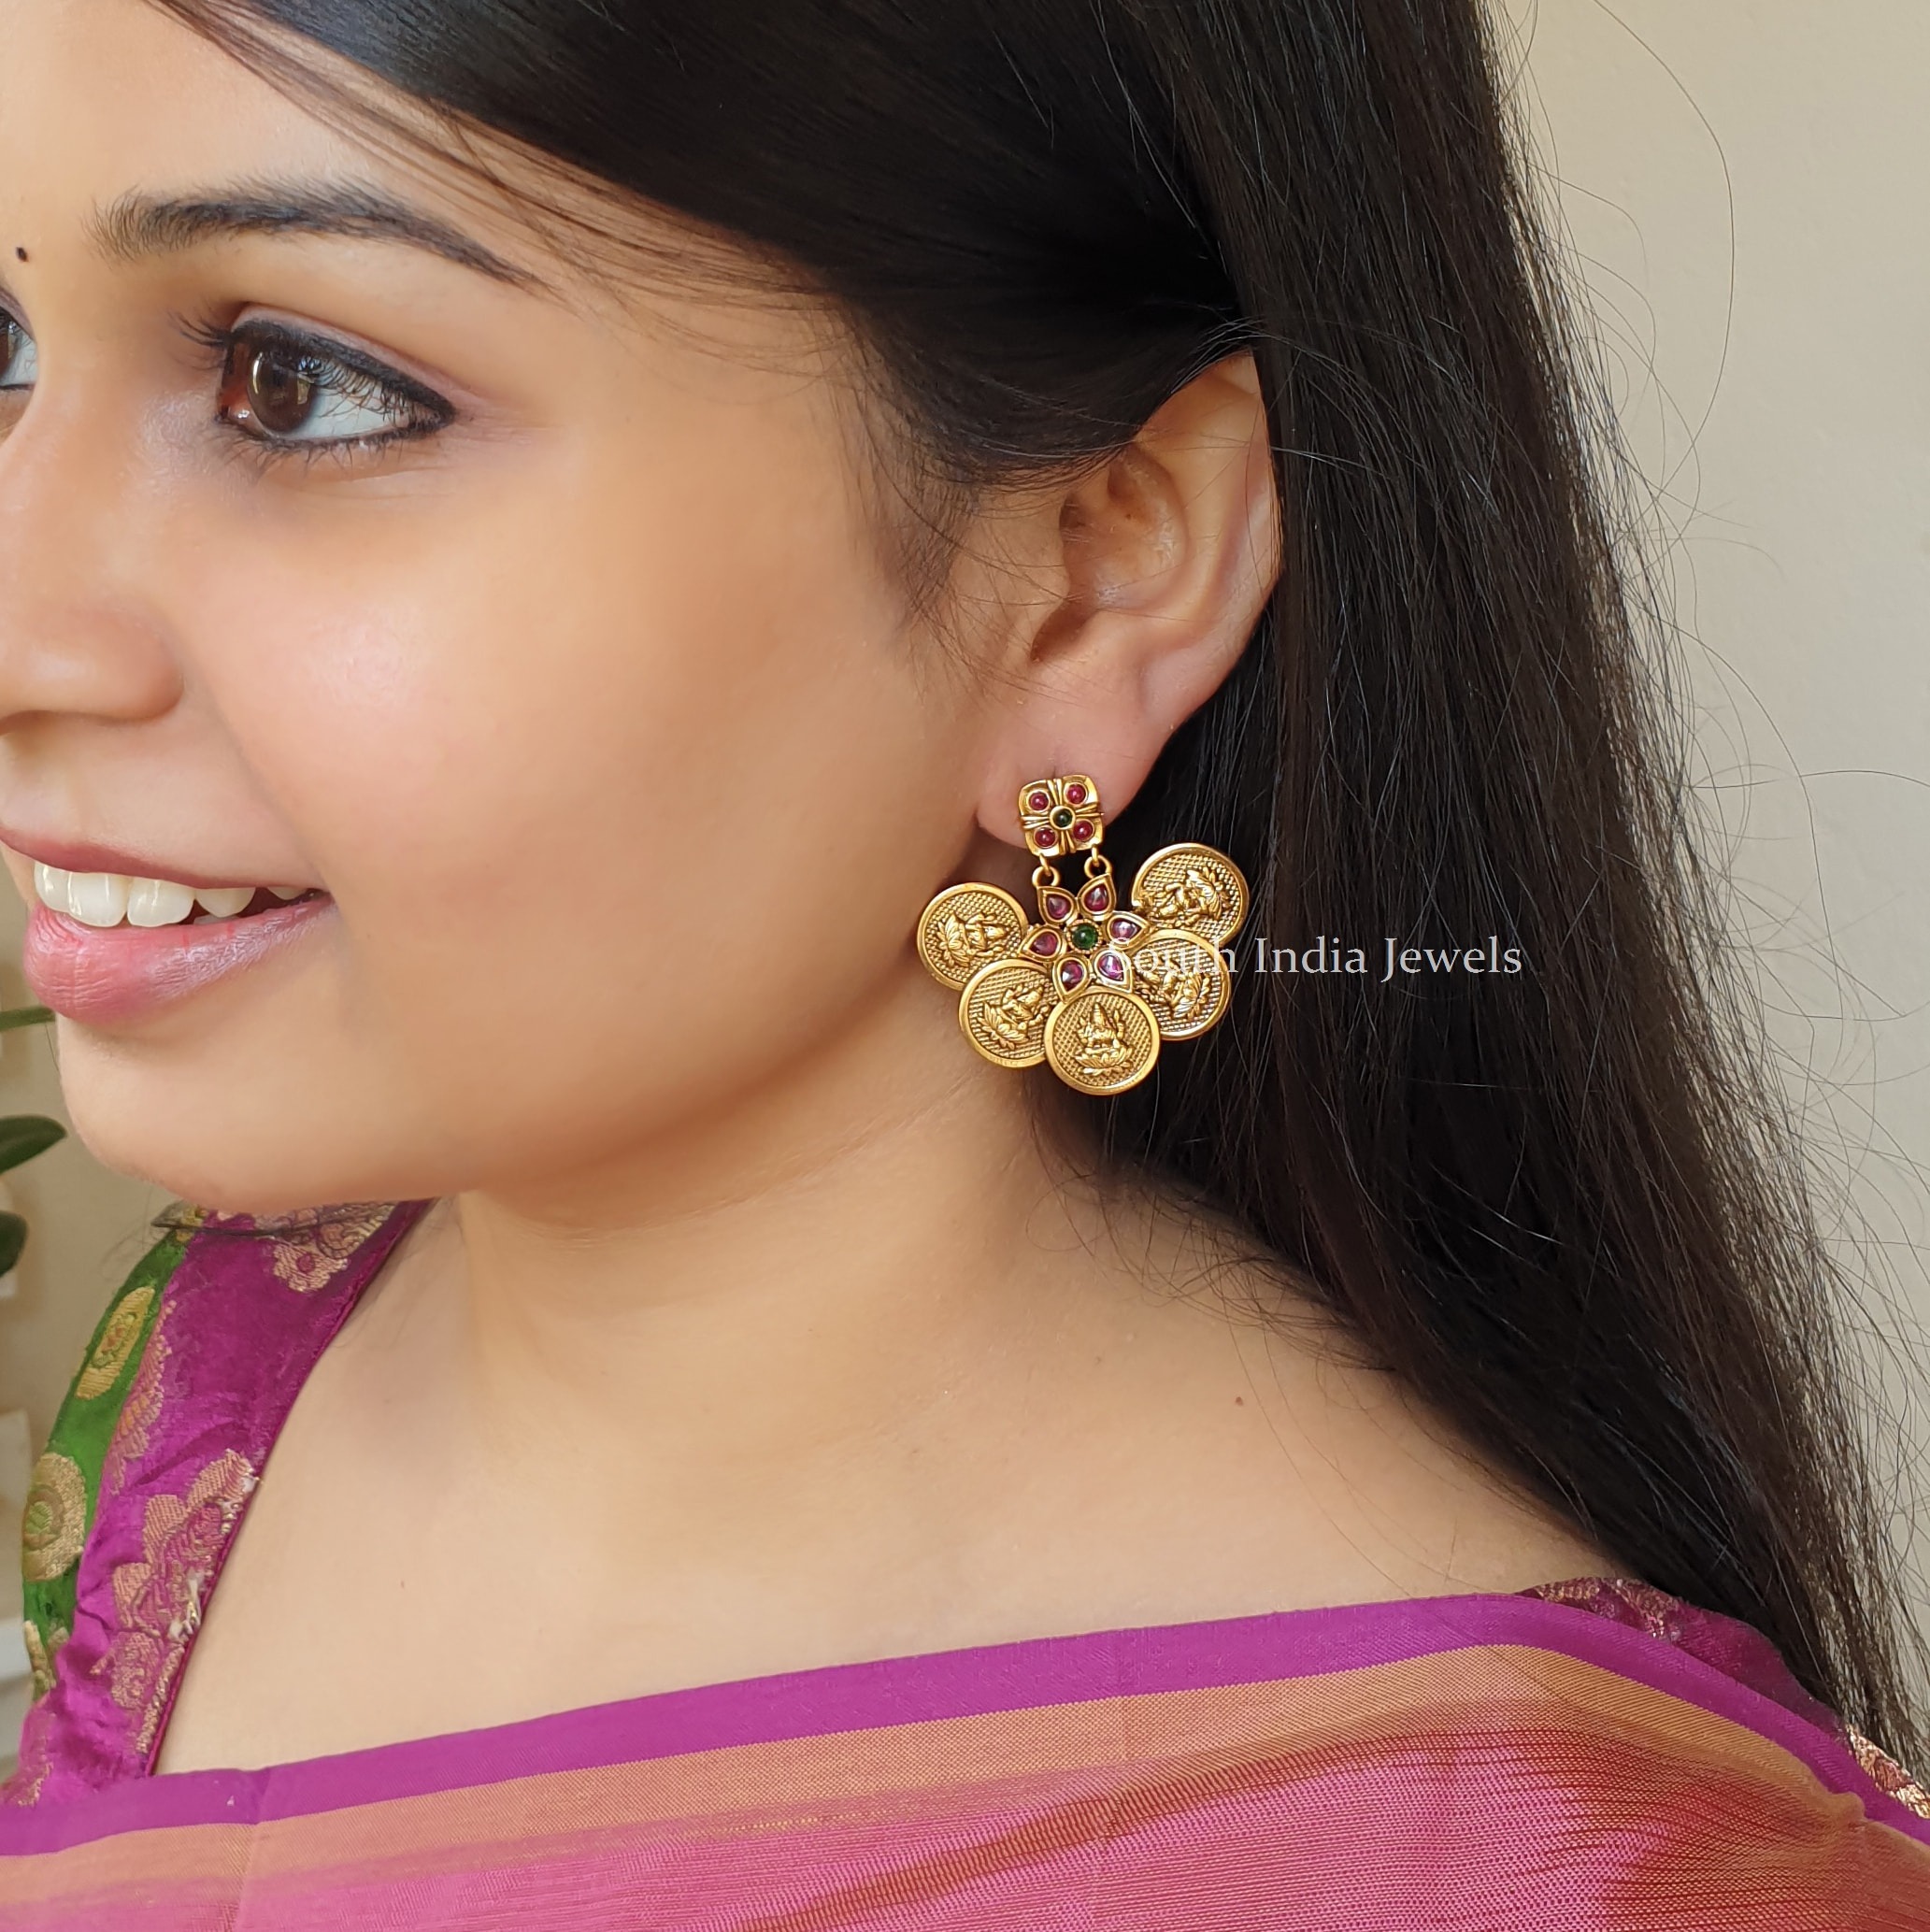 Arshis Home - Arshis - Buy Traditional and Fashion south India Jewels